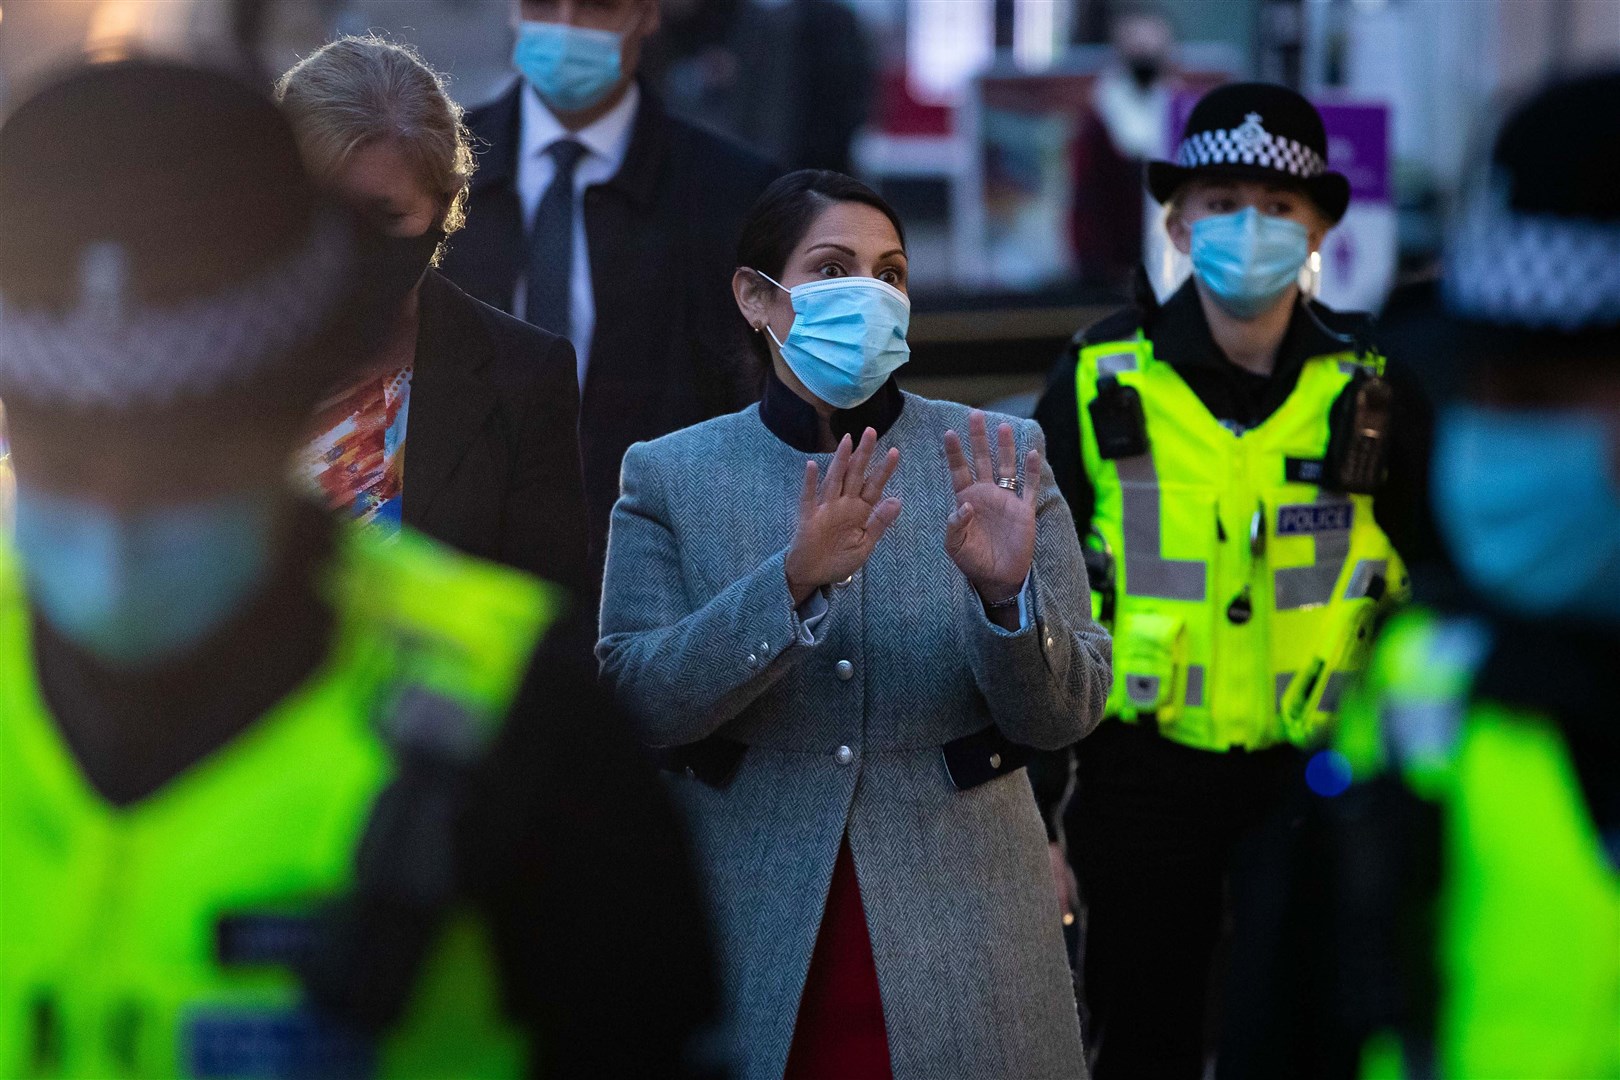 Home Secretary Priti Patel during a foot patrol with new police recruits (Aaron Chown/PA)